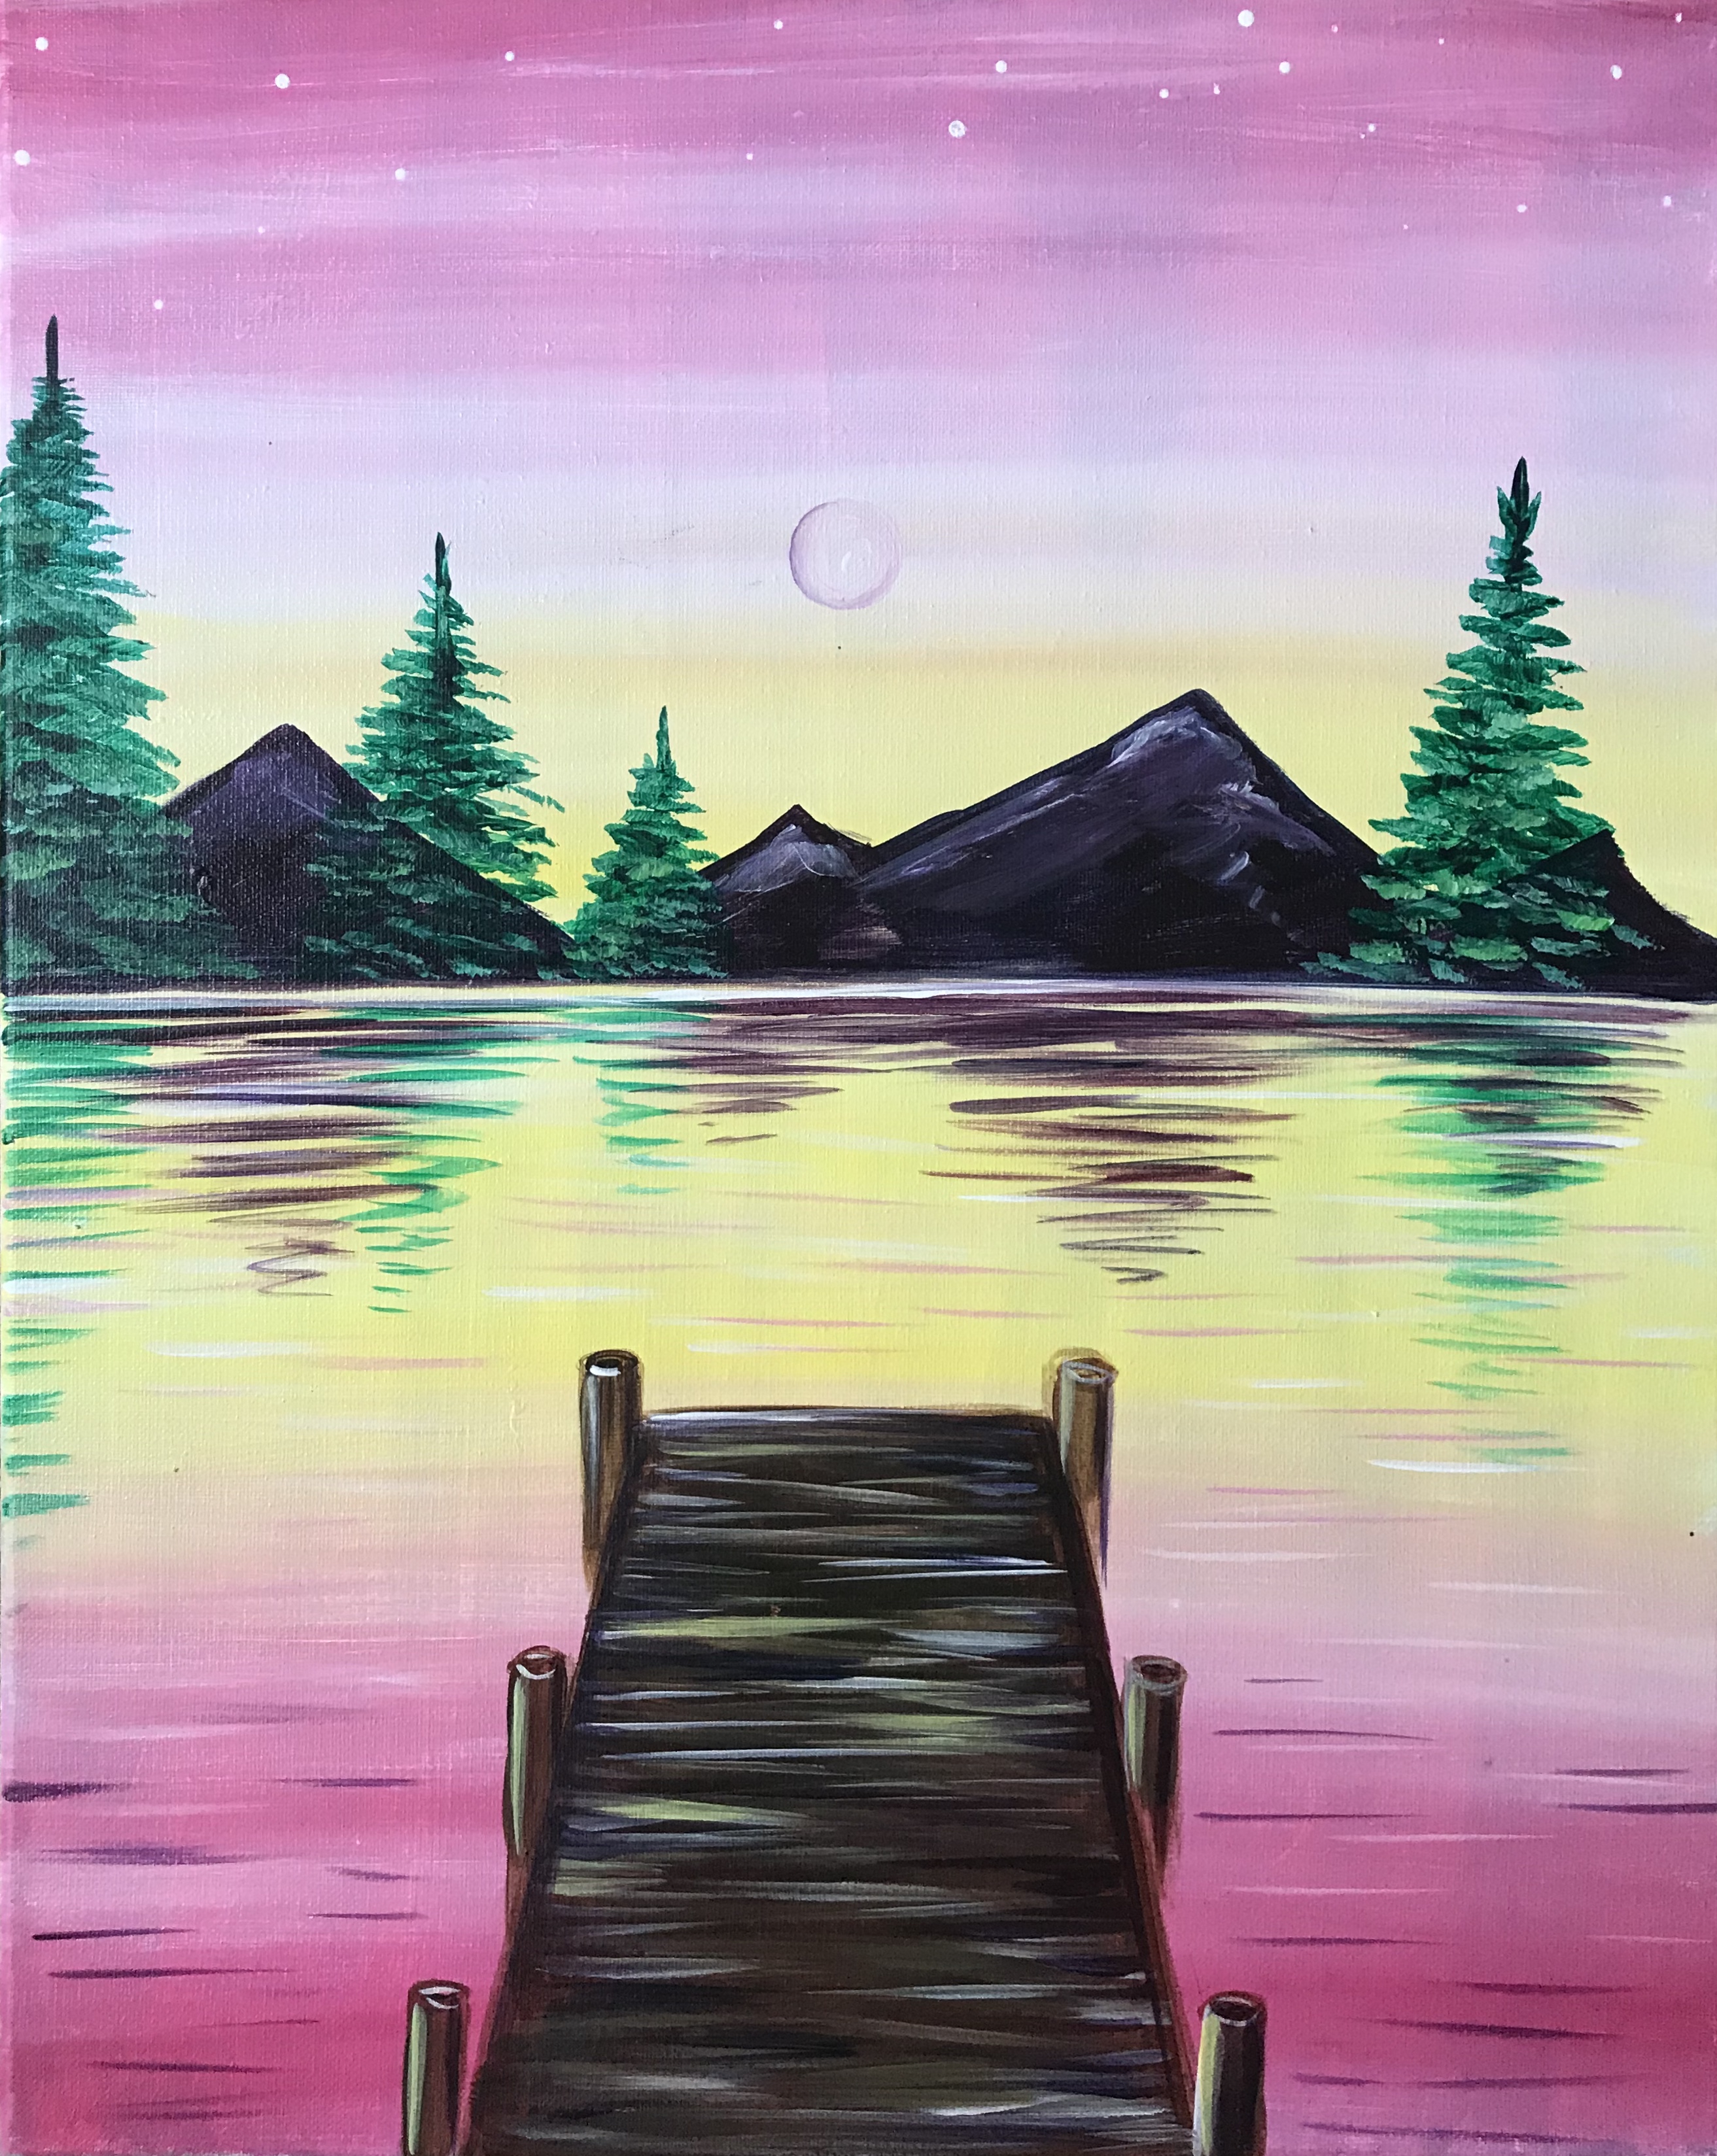 A Starry Sunset at The Lake experience project by Yaymaker